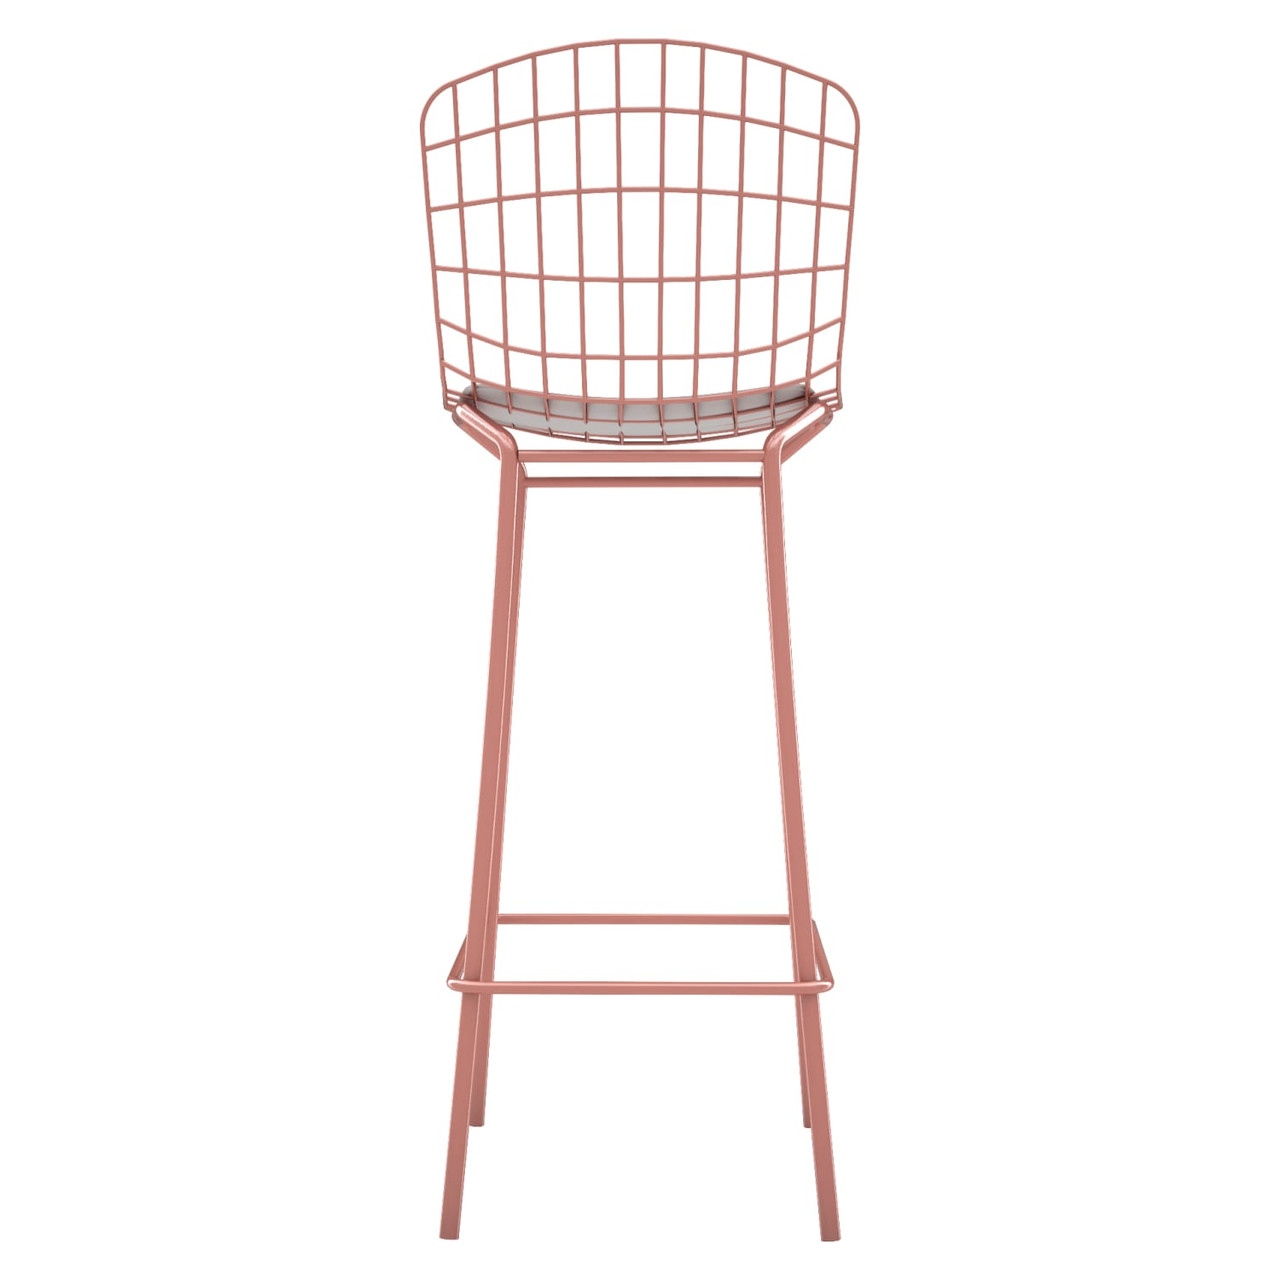 Madeline 41.73” Barstool with Seat Cushion in Rose Pink Gold and White